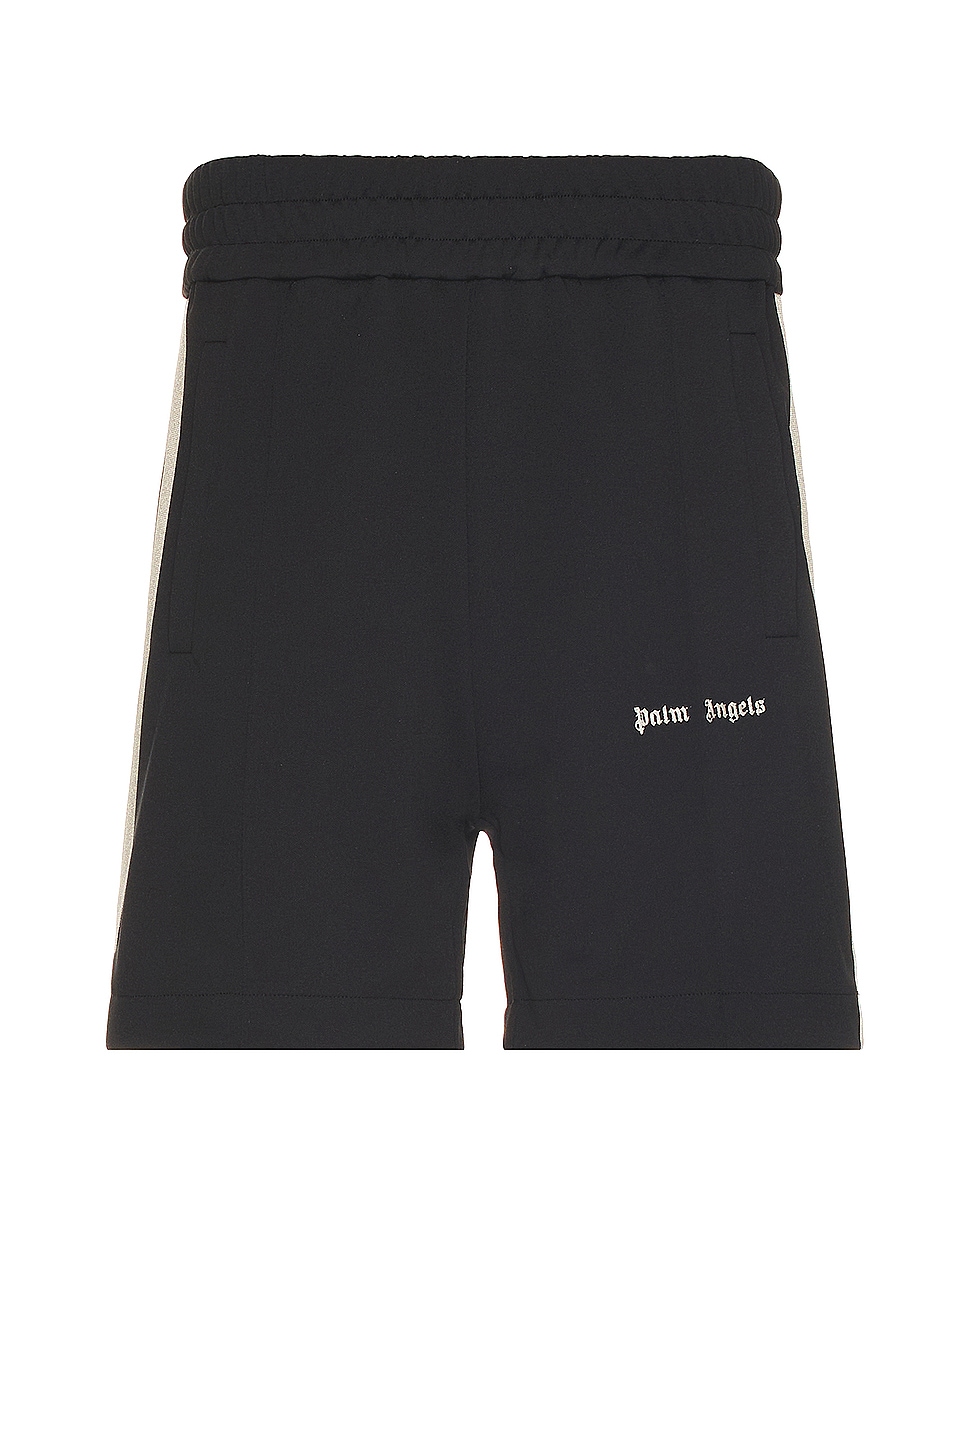 Image 1 of Palm Angels Classic Logo Track Shorts in Black & Off White